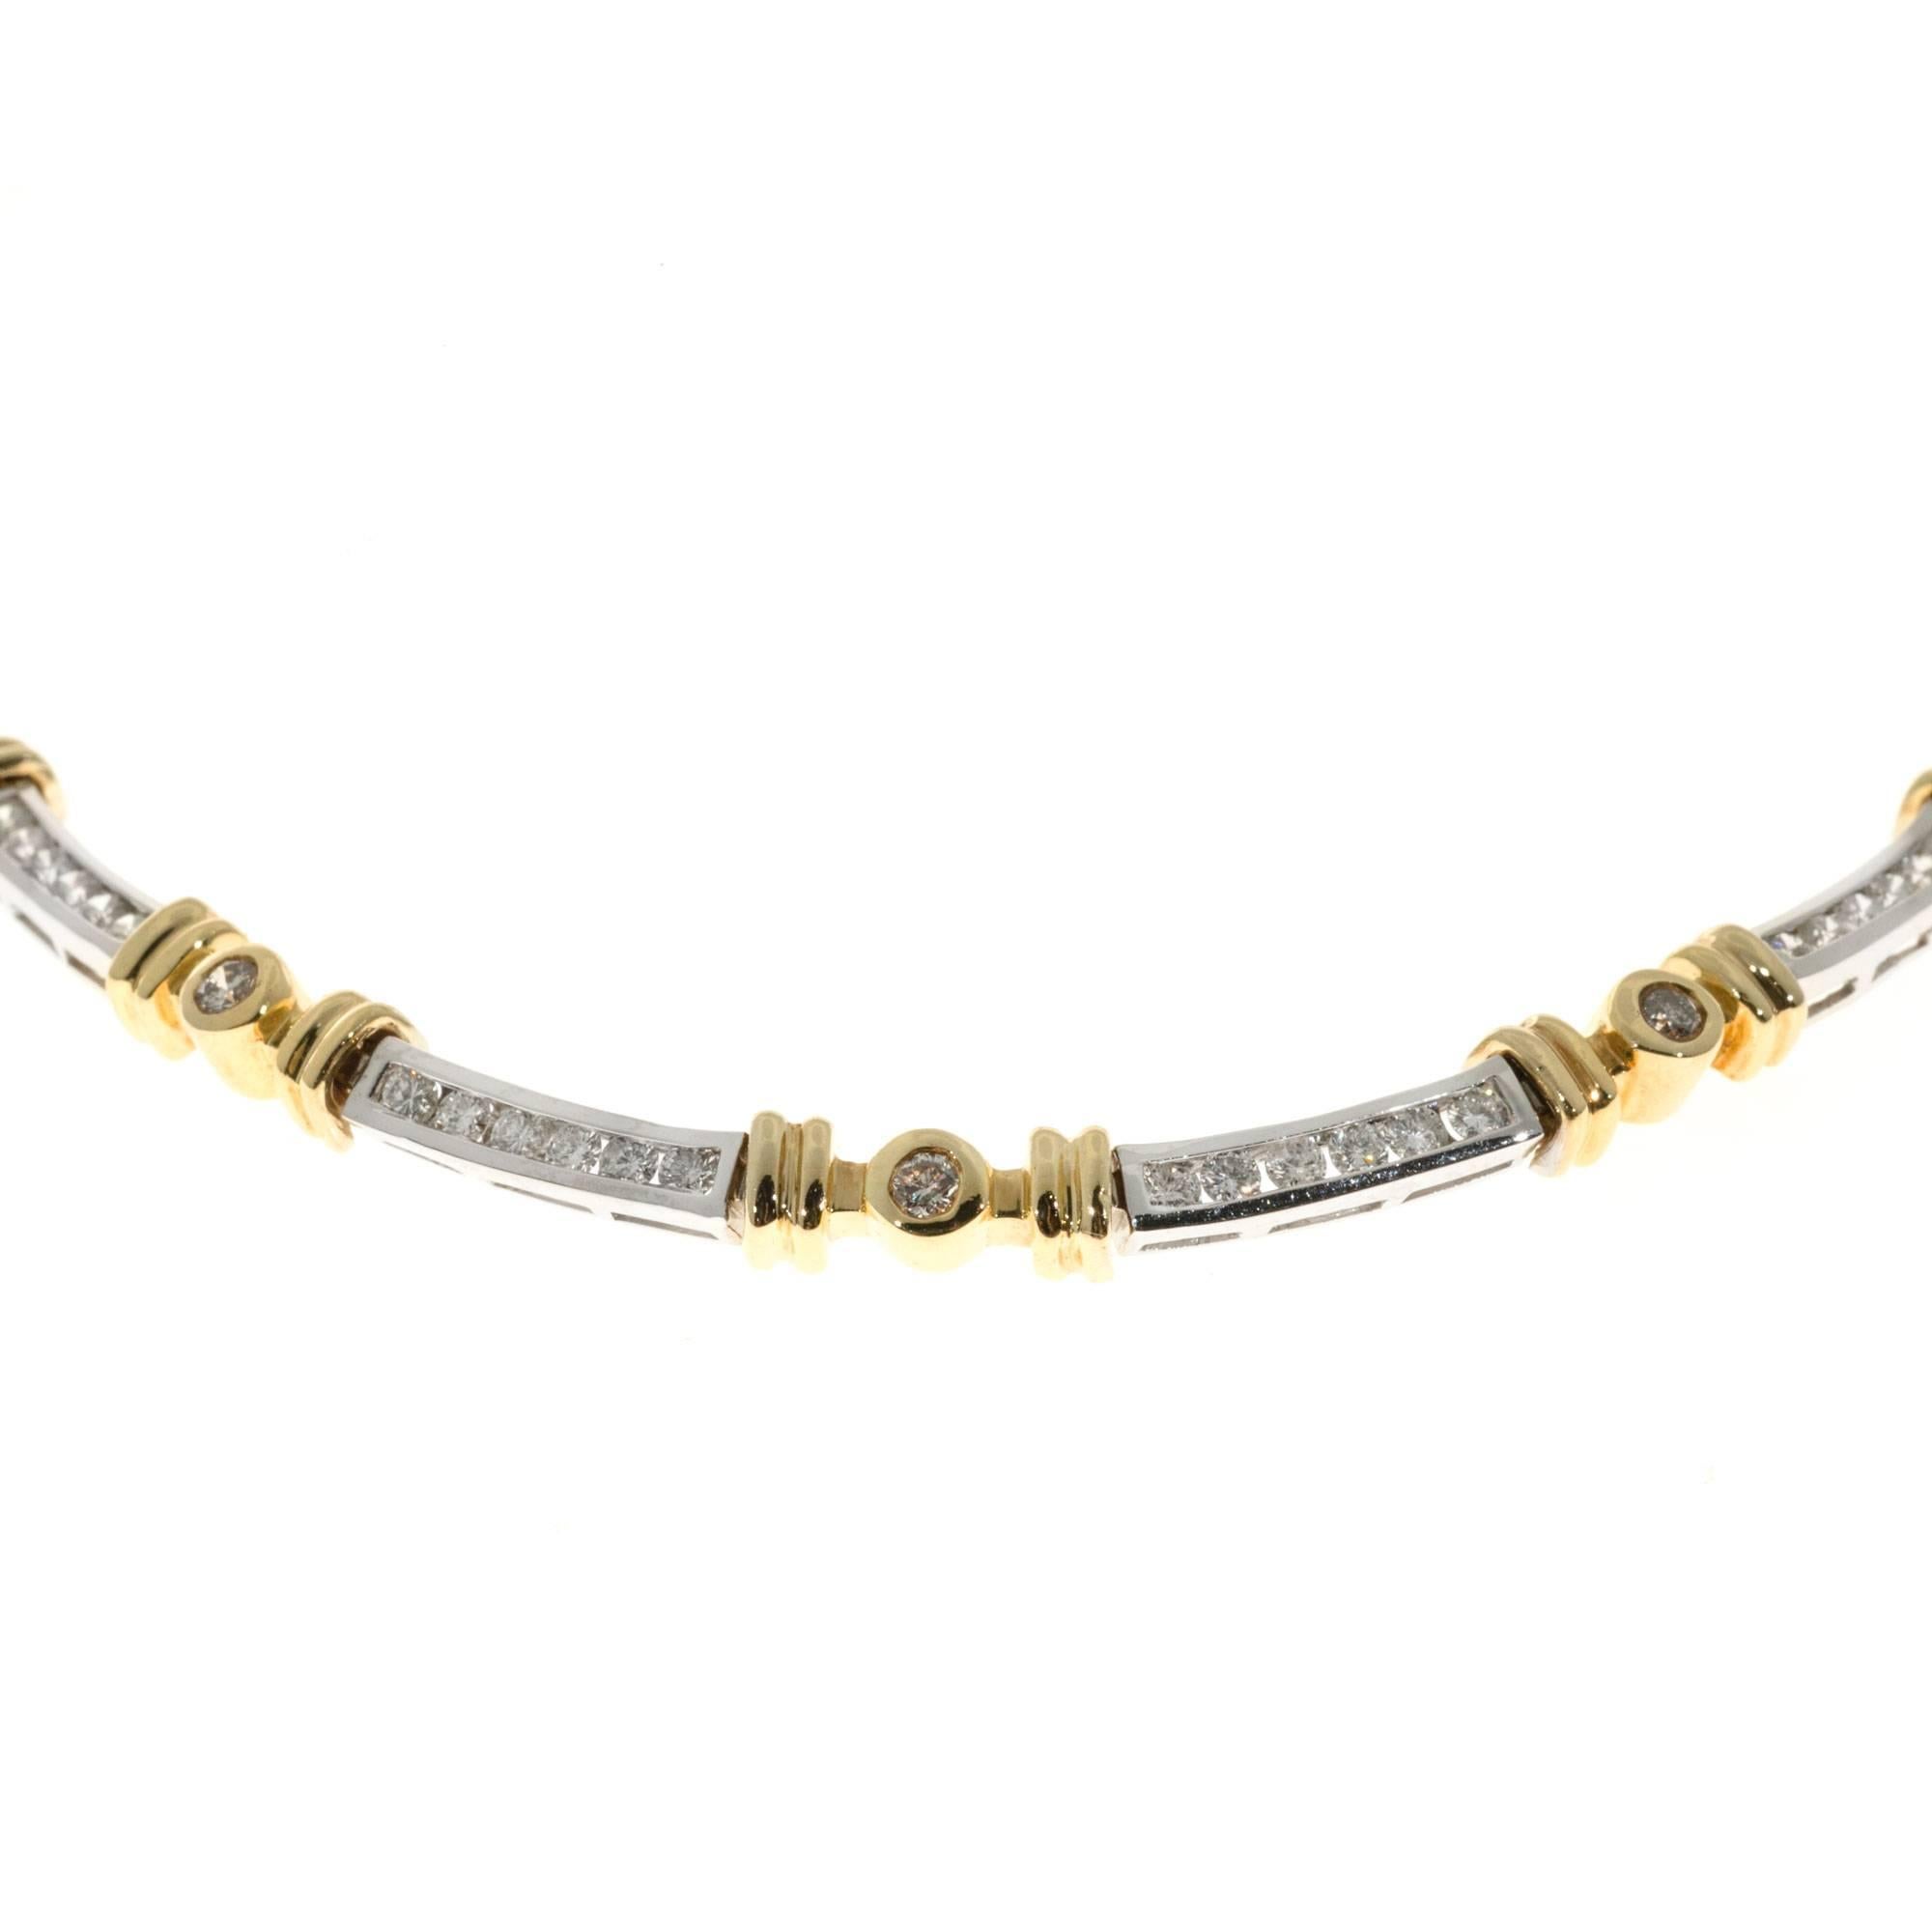 Simple and beautiful 2 tone Italian made necklace complete with a built in catch and an underside safety. Diamonds alternating channel set in white gold strips and bezel set in yellow gold tubes.

115 round diamonds approx. total weight 5.02cts,